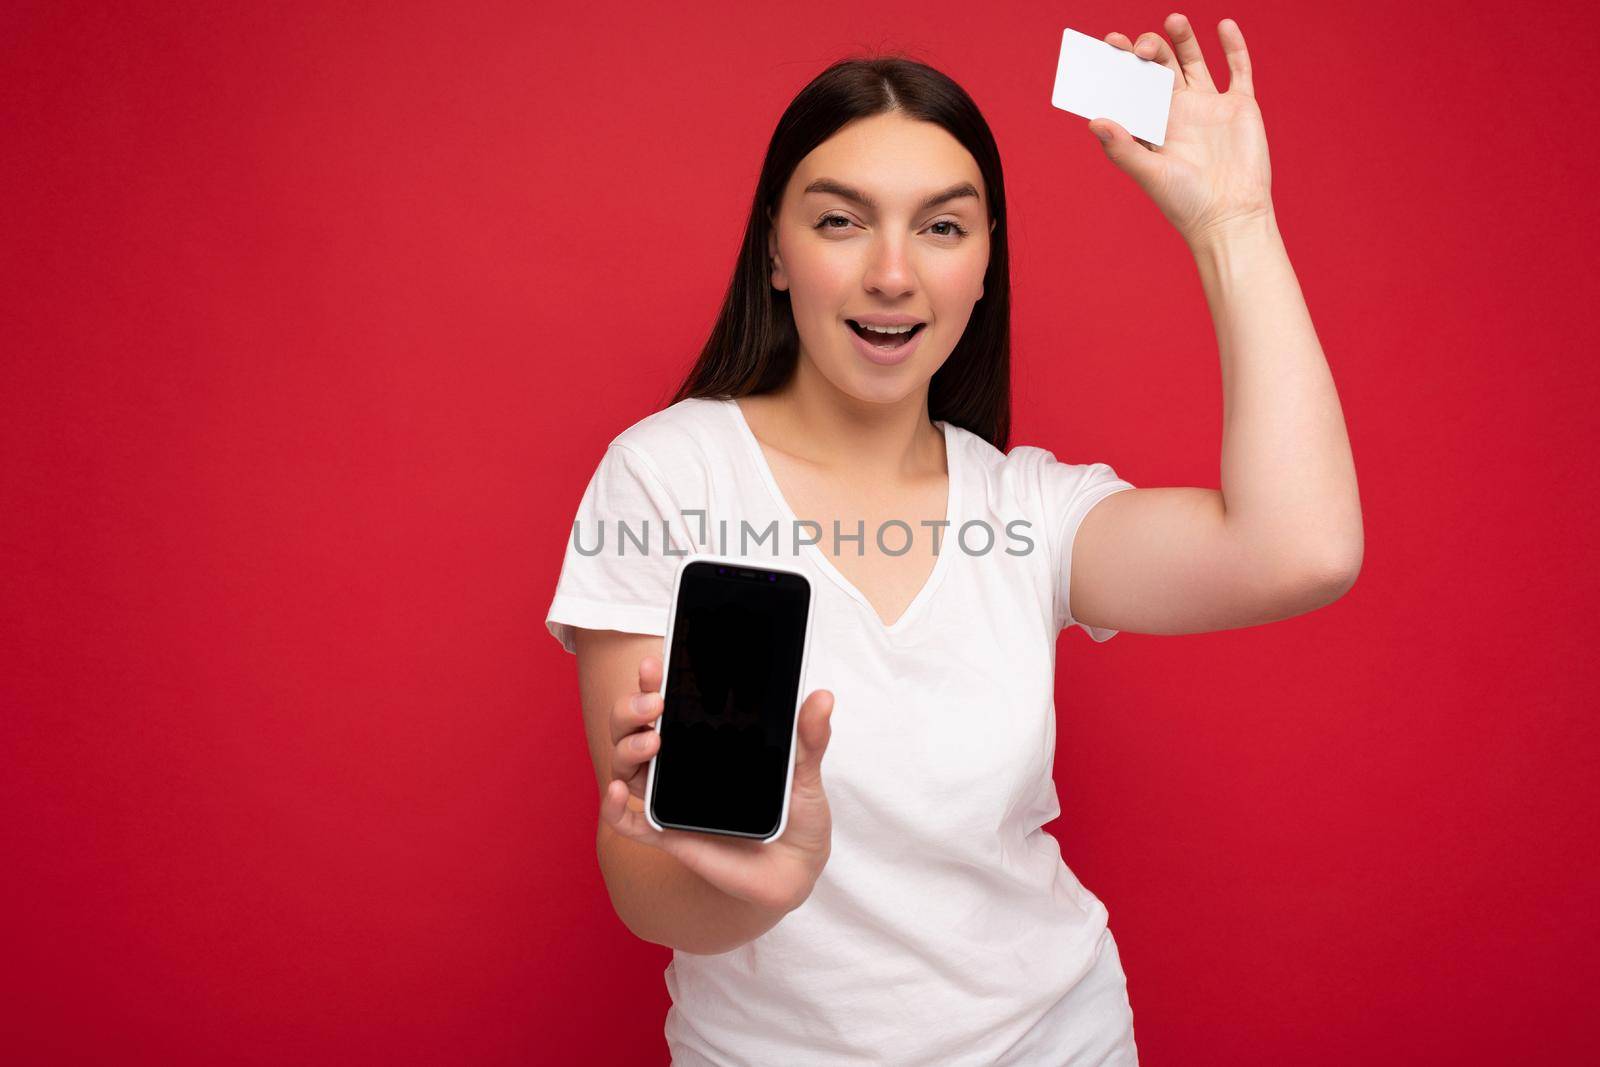 Photo of sexy attractive happy young brunette woman wearing casual white t-shirt isolated over red background with empty space holding in hand mobile phone and showing smartphone with empty screen for mockup and credit card looking at camera.